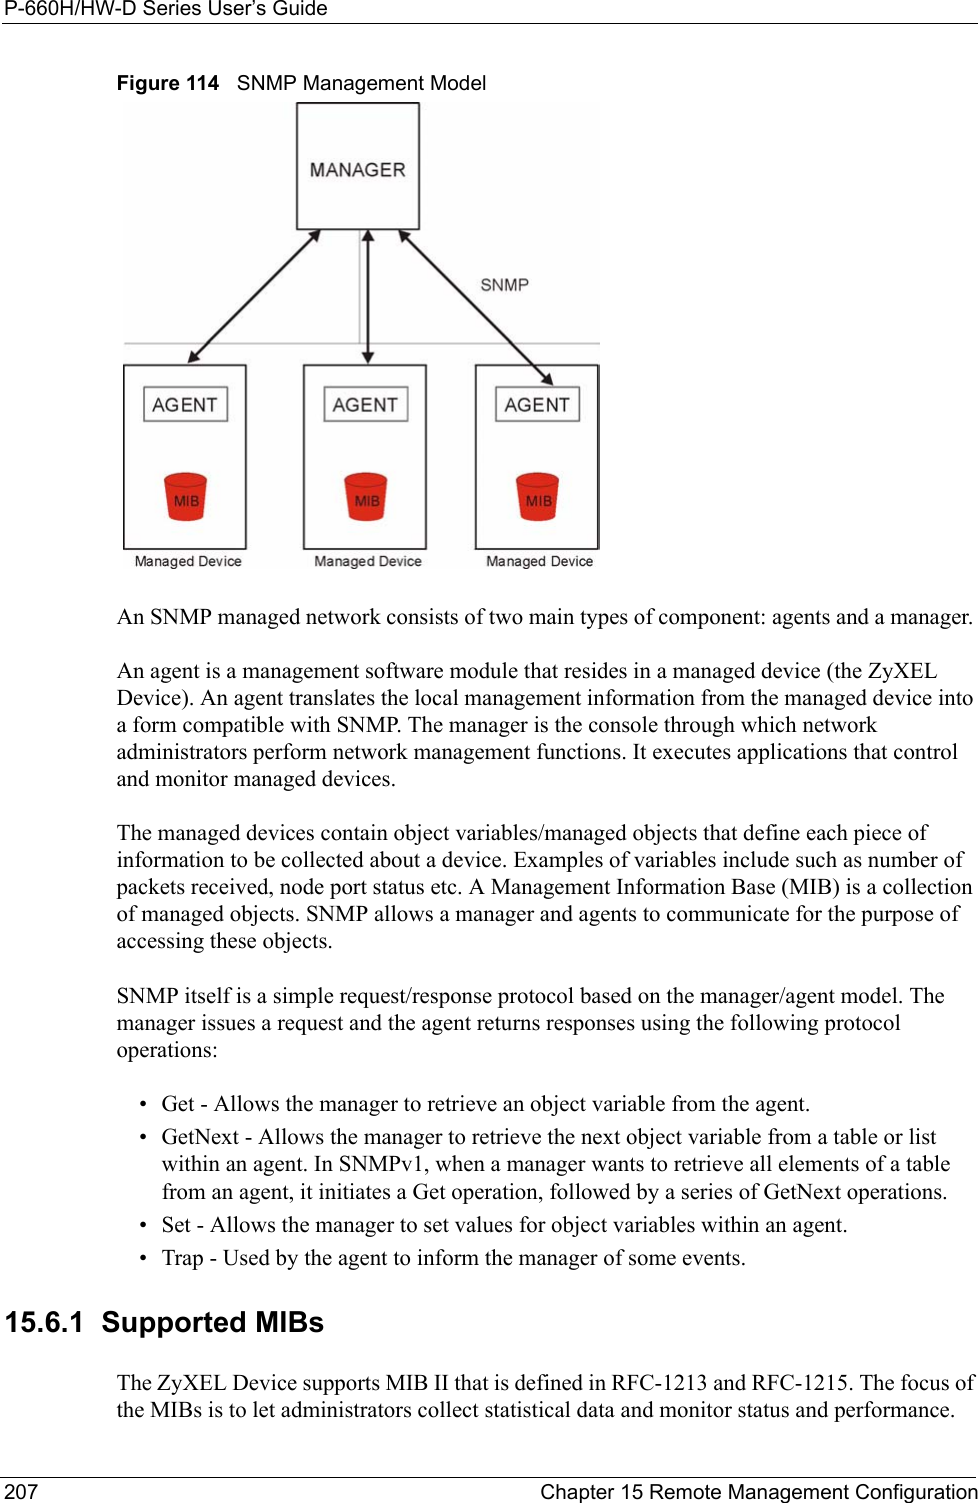 P-660H/HW-D Series User’s Guide207 Chapter 15 Remote Management ConfigurationFigure 114   SNMP Management ModelAn SNMP managed network consists of two main types of component: agents and a manager. An agent is a management software module that resides in a managed device (the ZyXEL Device). An agent translates the local management information from the managed device into a form compatible with SNMP. The manager is the console through which network administrators perform network management functions. It executes applications that control and monitor managed devices. The managed devices contain object variables/managed objects that define each piece of information to be collected about a device. Examples of variables include such as number of packets received, node port status etc. A Management Information Base (MIB) is a collection of managed objects. SNMP allows a manager and agents to communicate for the purpose of accessing these objects.SNMP itself is a simple request/response protocol based on the manager/agent model. The manager issues a request and the agent returns responses using the following protocol operations:• Get - Allows the manager to retrieve an object variable from the agent. • GetNext - Allows the manager to retrieve the next object variable from a table or list within an agent. In SNMPv1, when a manager wants to retrieve all elements of a table from an agent, it initiates a Get operation, followed by a series of GetNext operations. • Set - Allows the manager to set values for object variables within an agent. • Trap - Used by the agent to inform the manager of some events.15.6.1  Supported MIBsThe ZyXEL Device supports MIB II that is defined in RFC-1213 and RFC-1215. The focus of the MIBs is to let administrators collect statistical data and monitor status and performance.